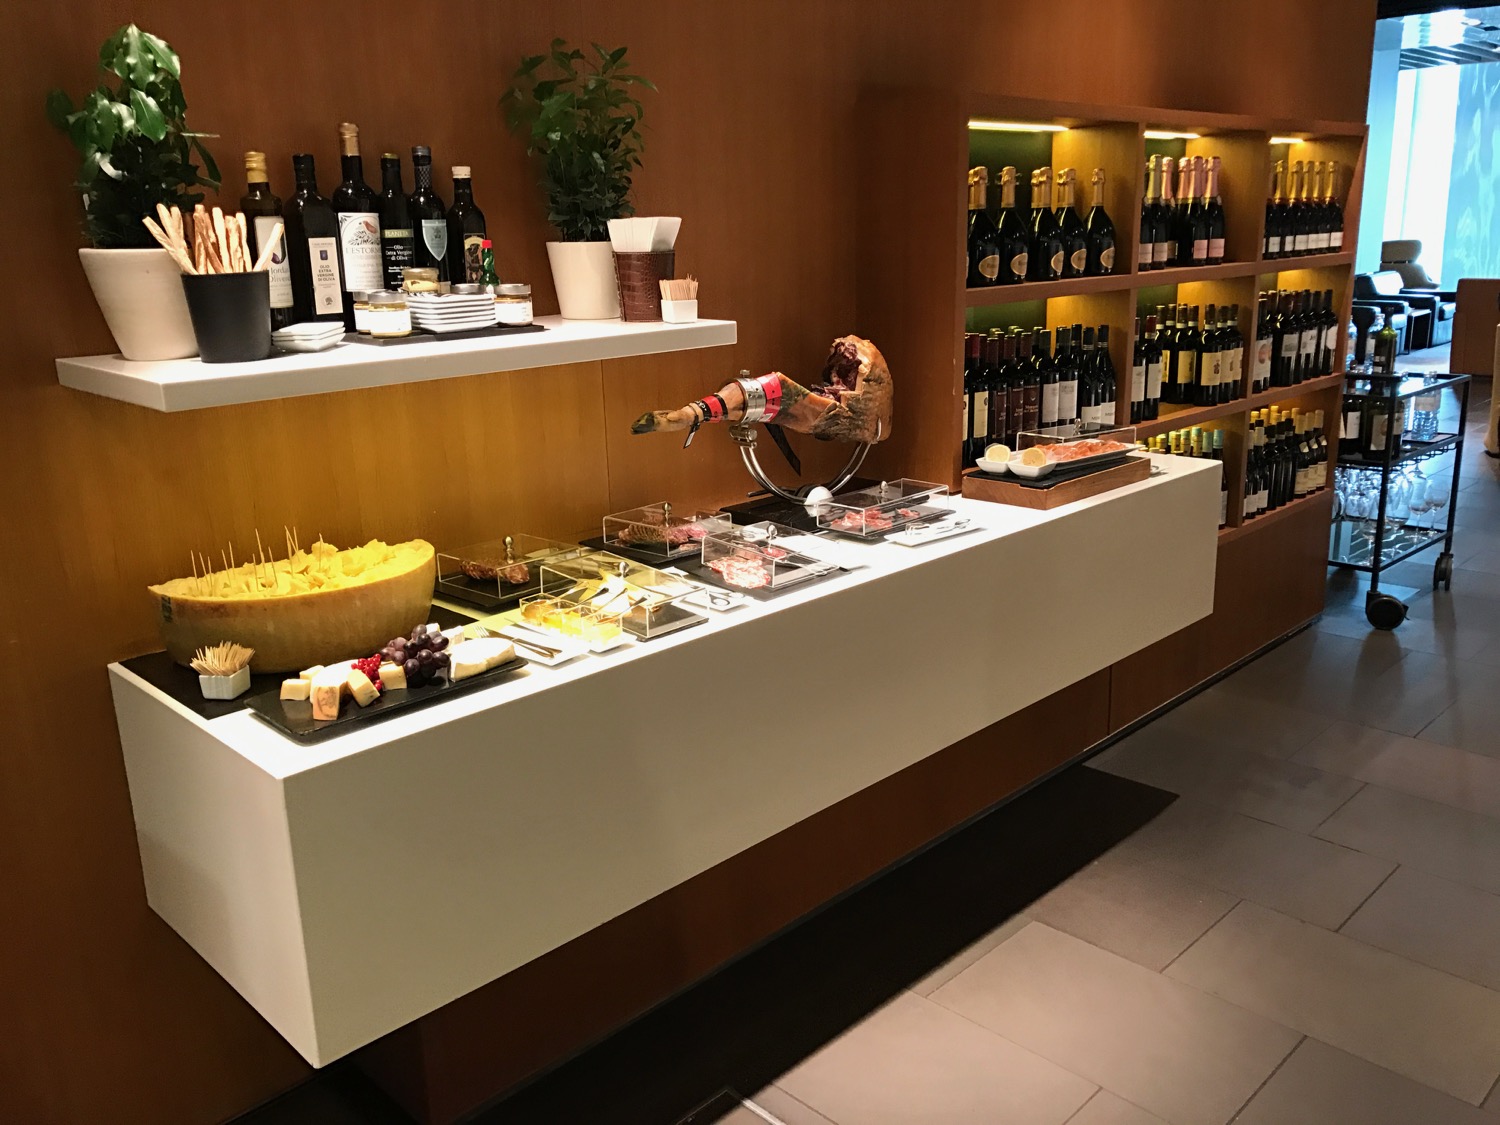 a display of wine bottles and snacks